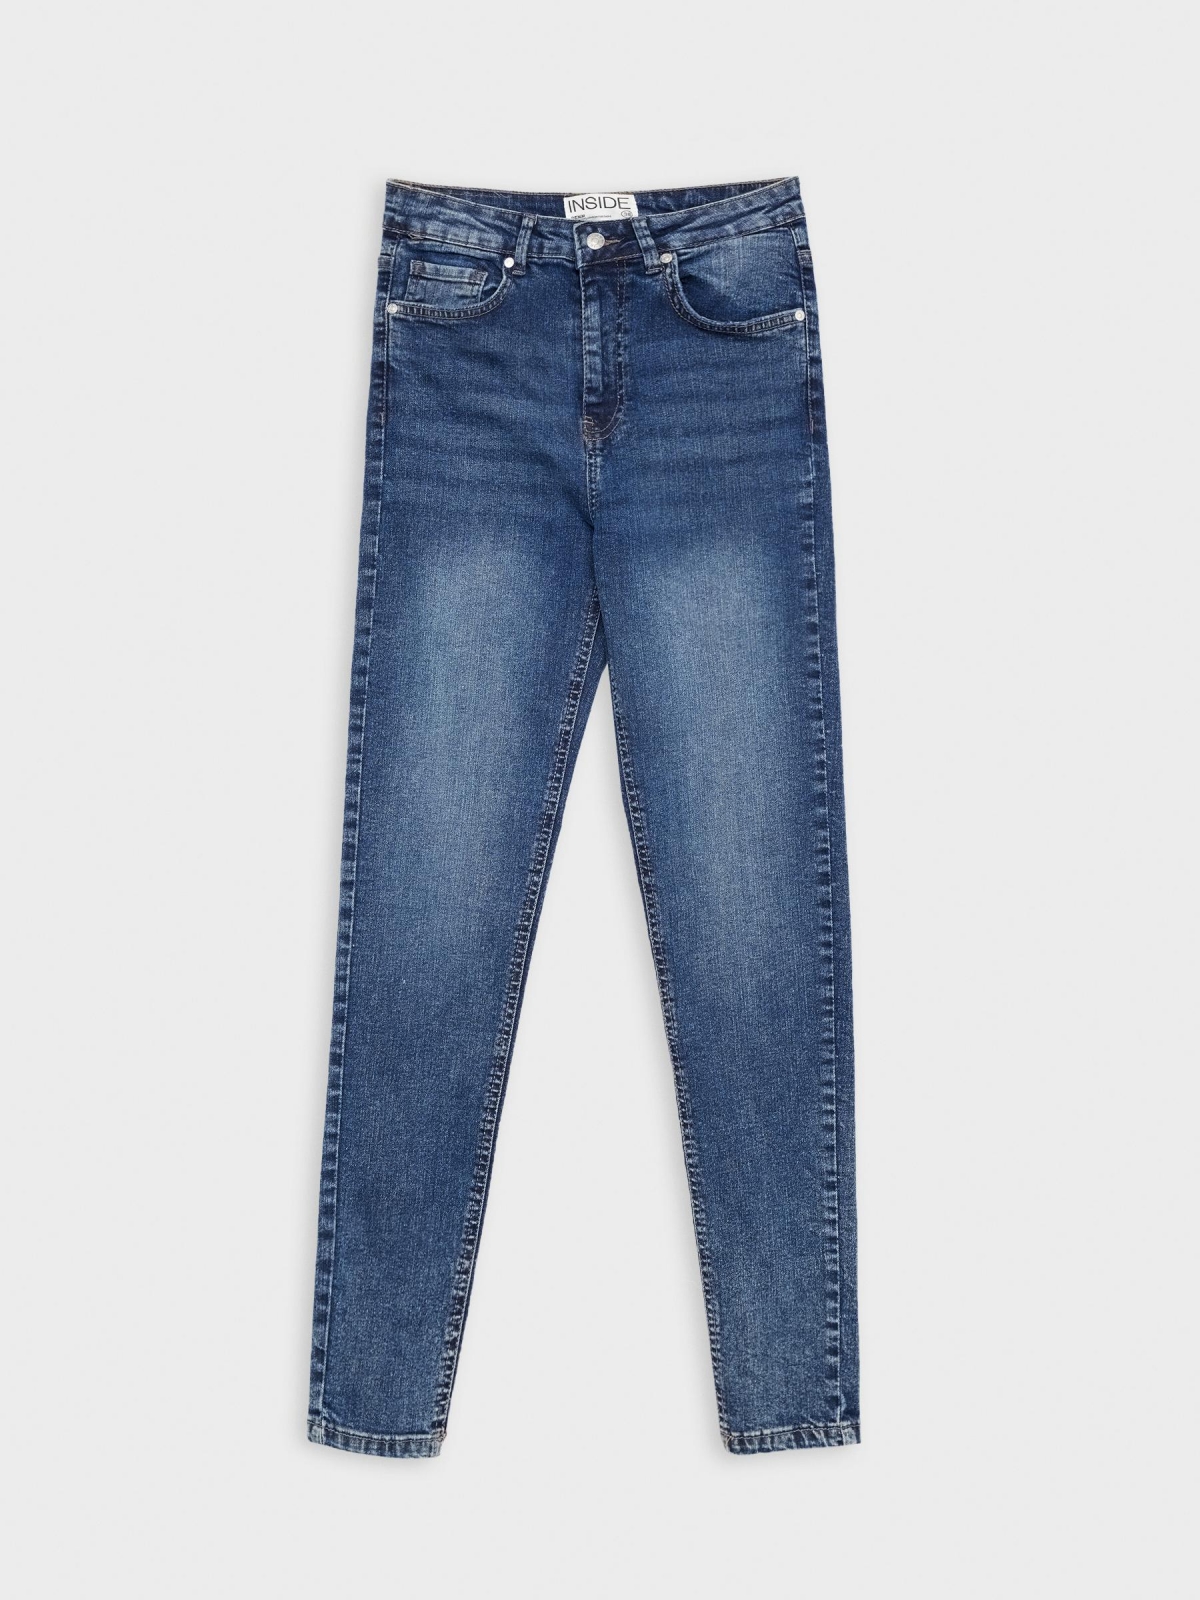  High waist skinny jeans with five pockets steel blue